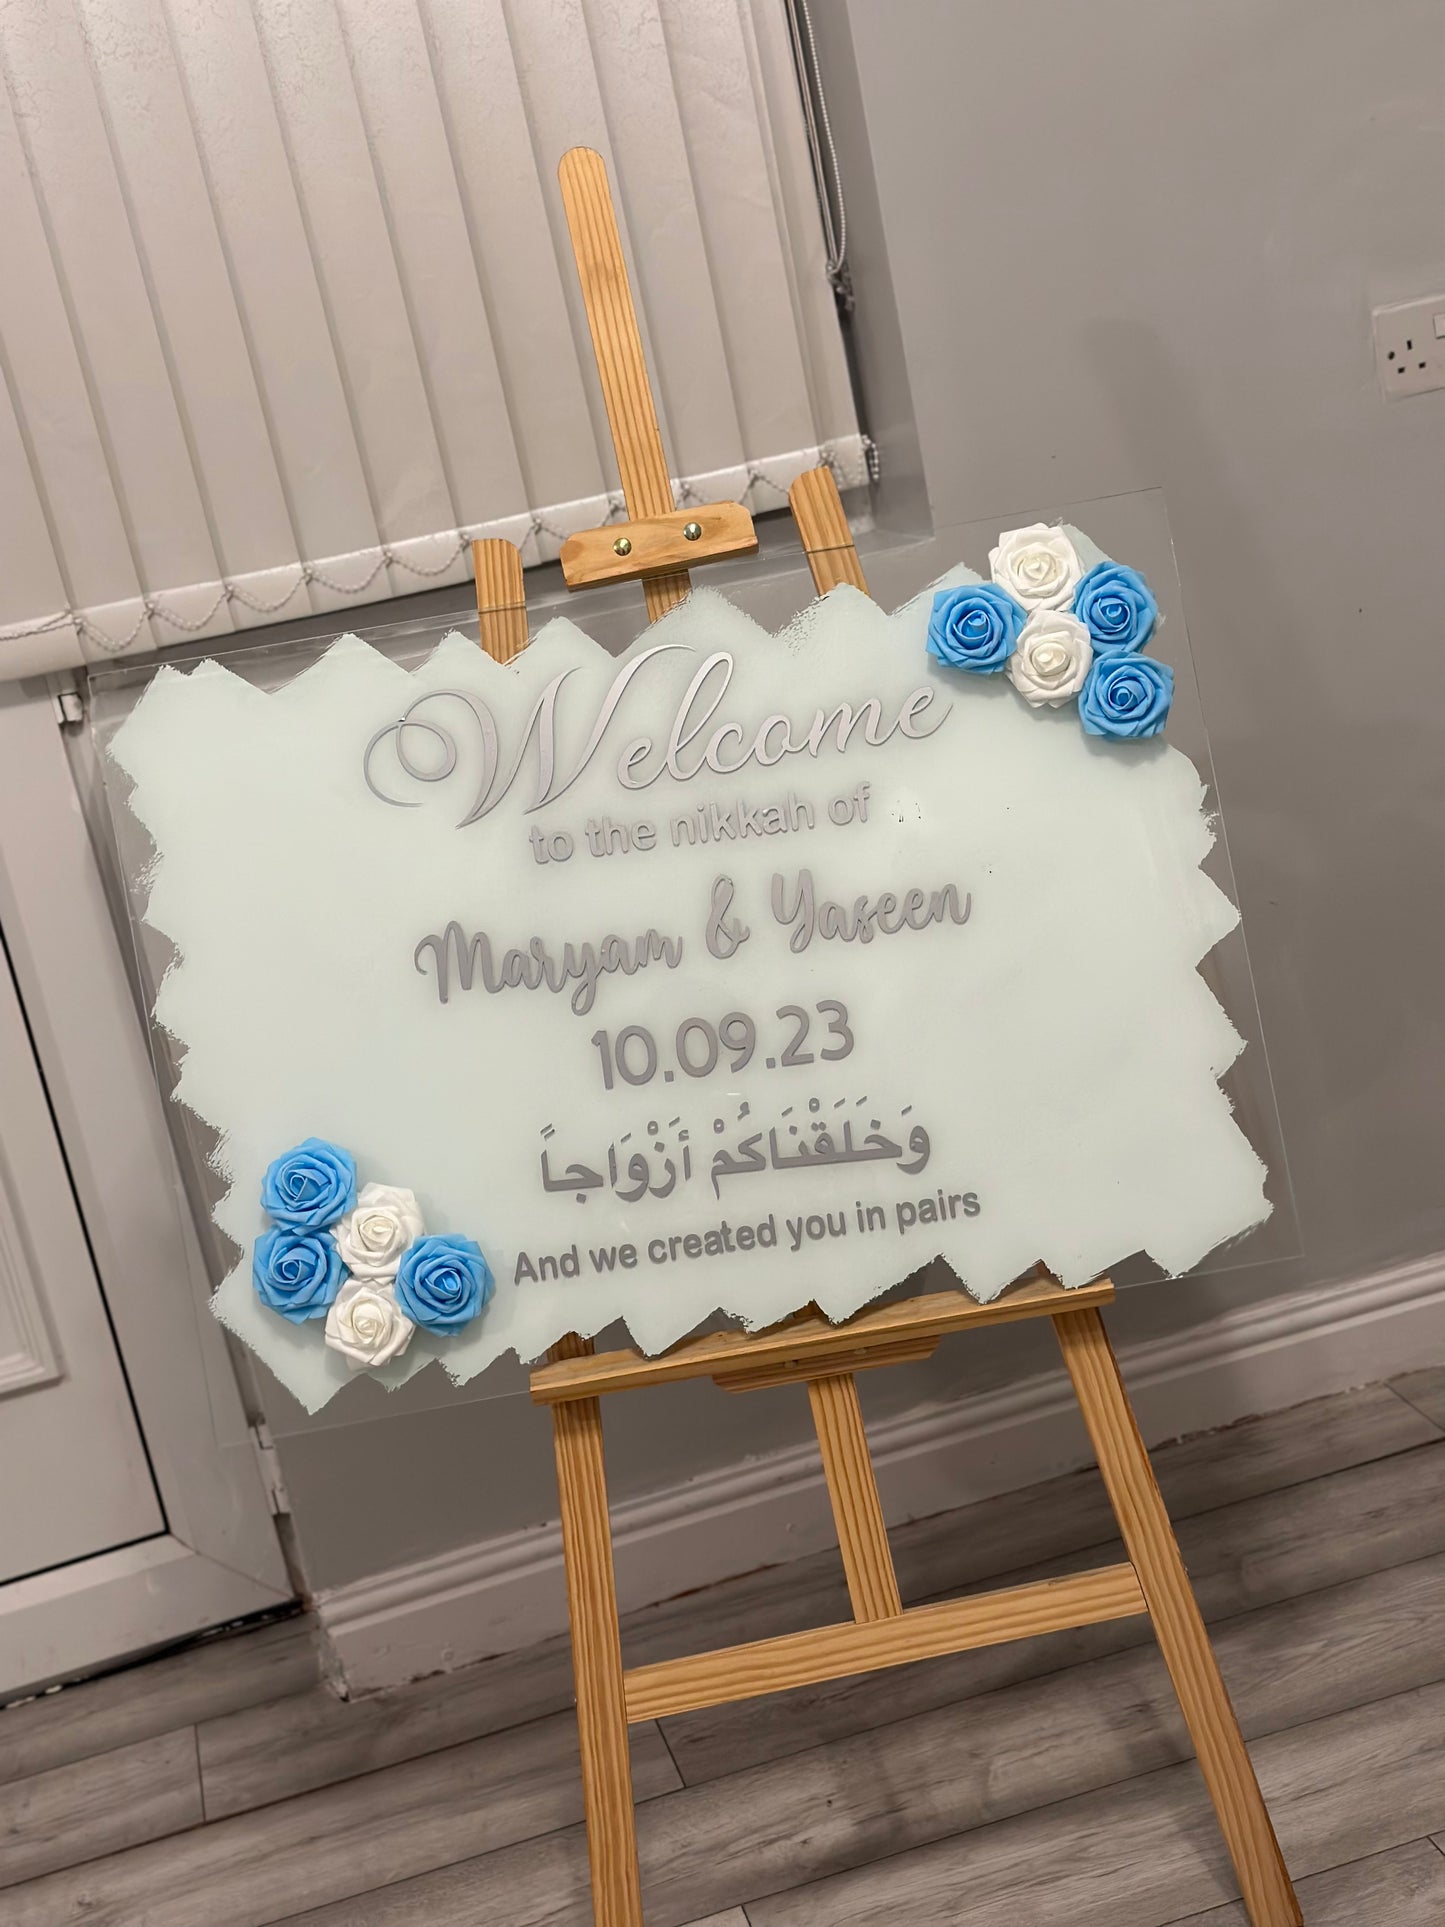 A1 glass welcome sign